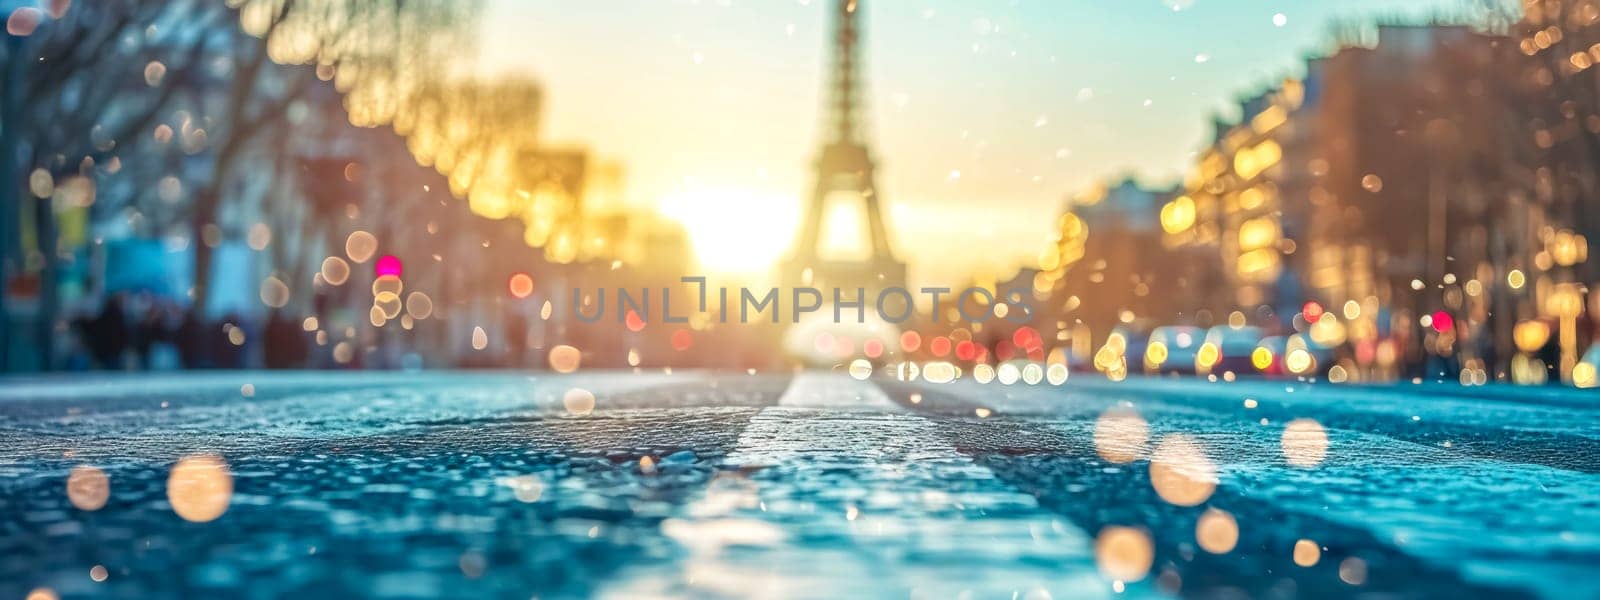 blurred. Sunset view of a Paris street leading to the Eiffel Tower, with a bokeh effect and wet ground reflecting lights. by Edophoto